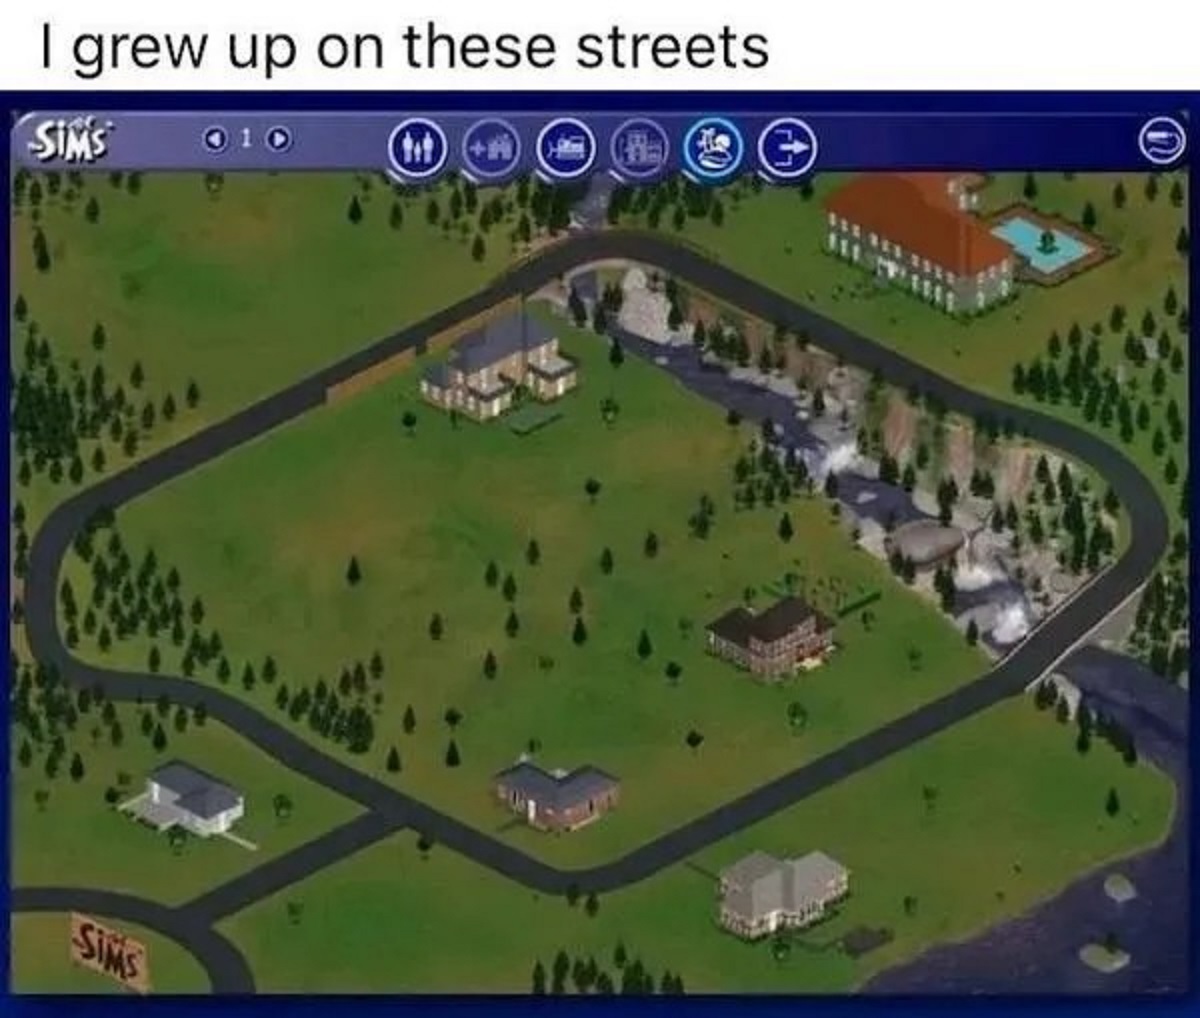 sims complete collection - I grew up on these streets Sims Sims